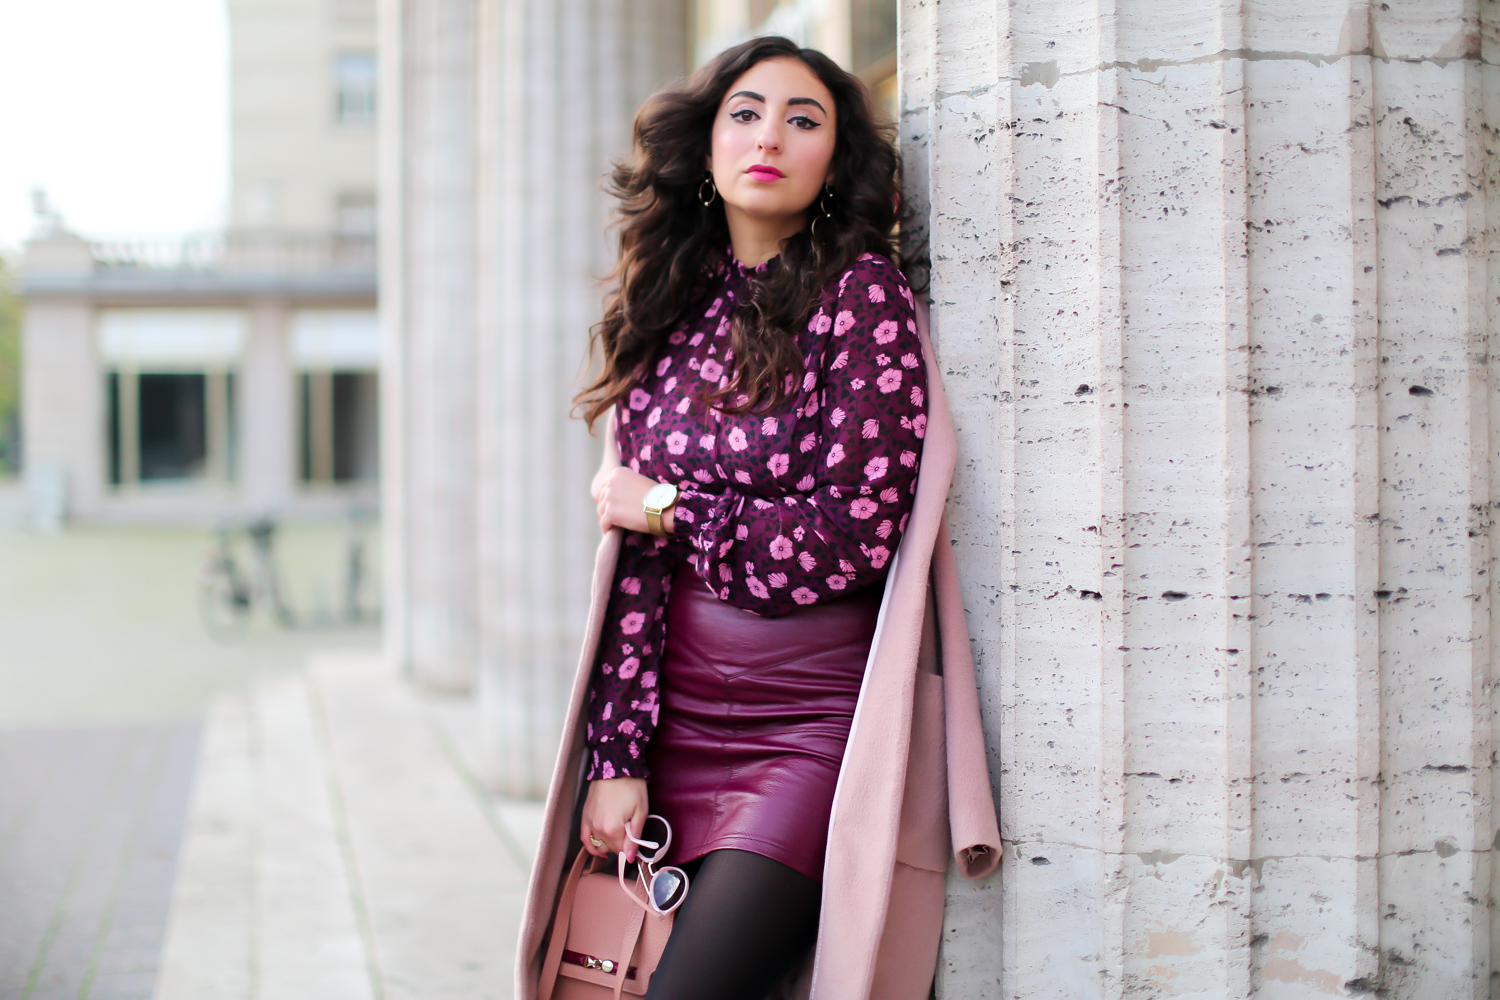 Leather Skirt and Flower Blouse t and highneck all burgundy outfit fall style flattered adax minirock inspired herbst look streetstyle mode blog samieze berlin_-9.jpg